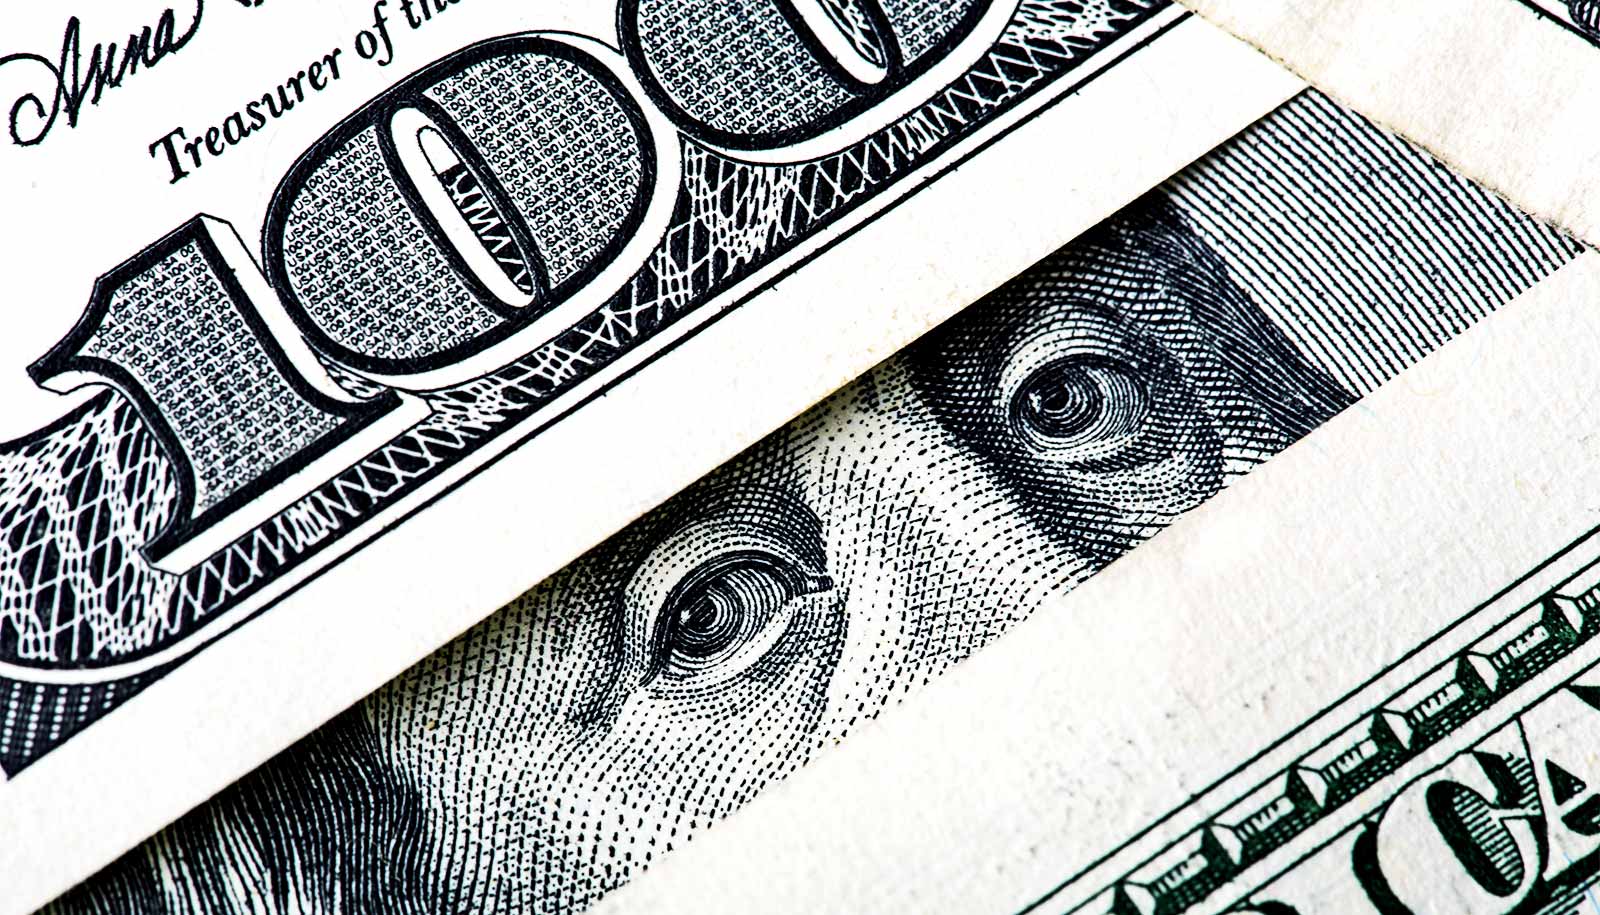 Is it time to consider universal basic income? - Futurity